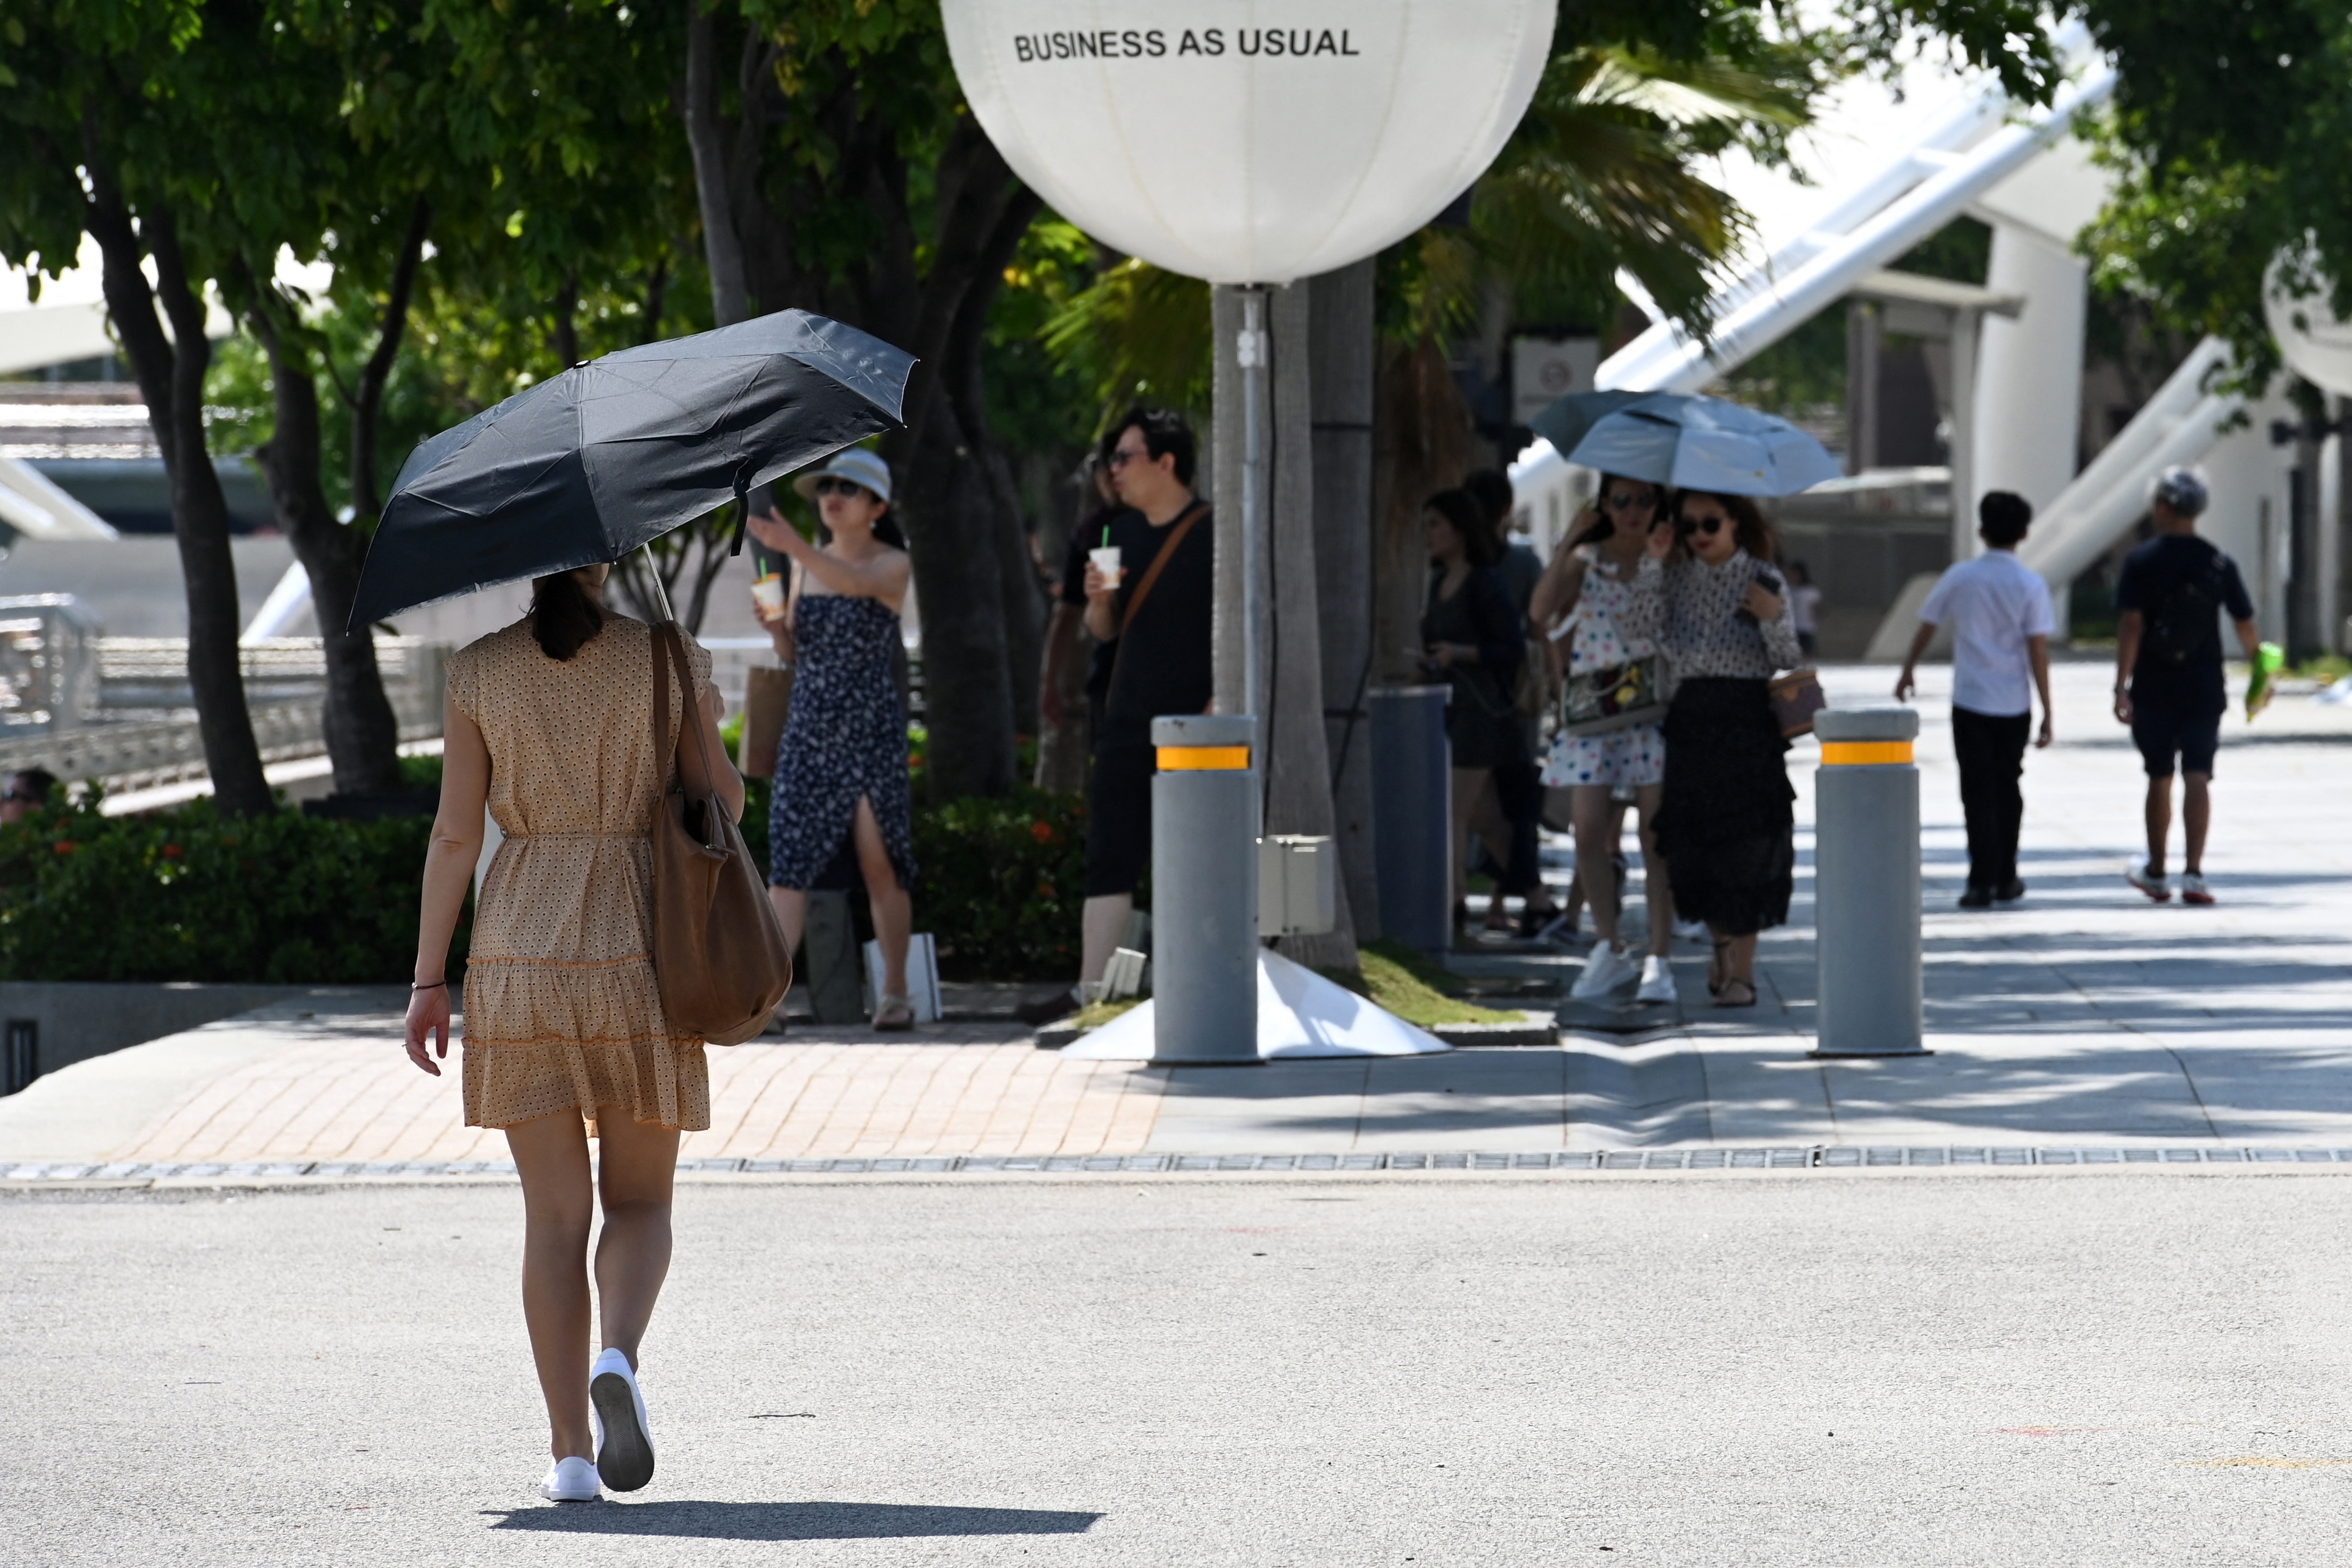 People shield themselves from the sun as they walk along Marina Bay in Singapore. (PHOTO: AFP / ROSLAN RAHMAN)